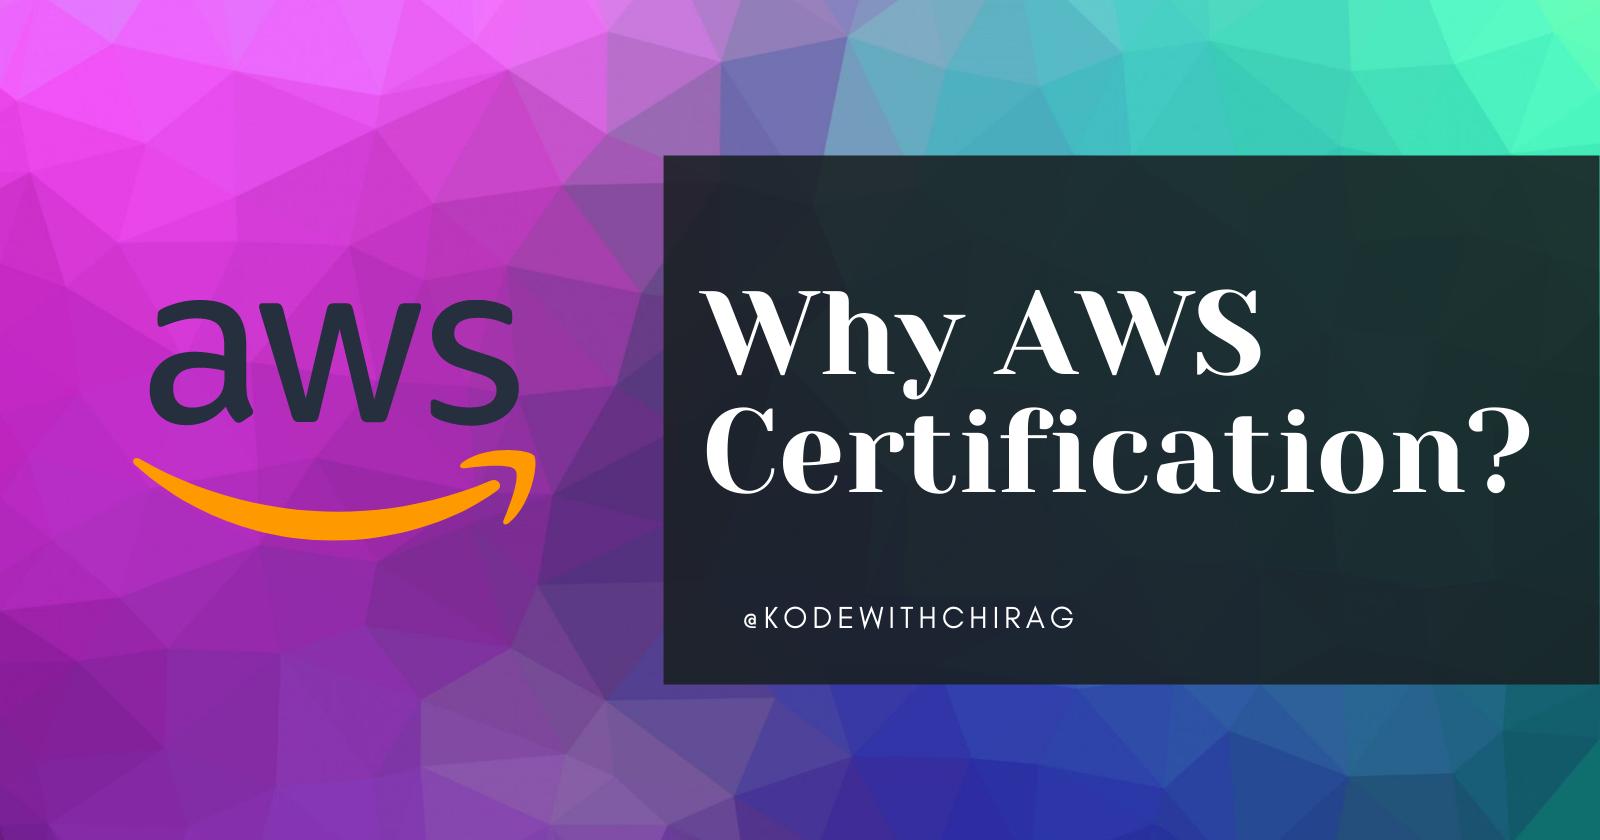 Why do AWS Certification?